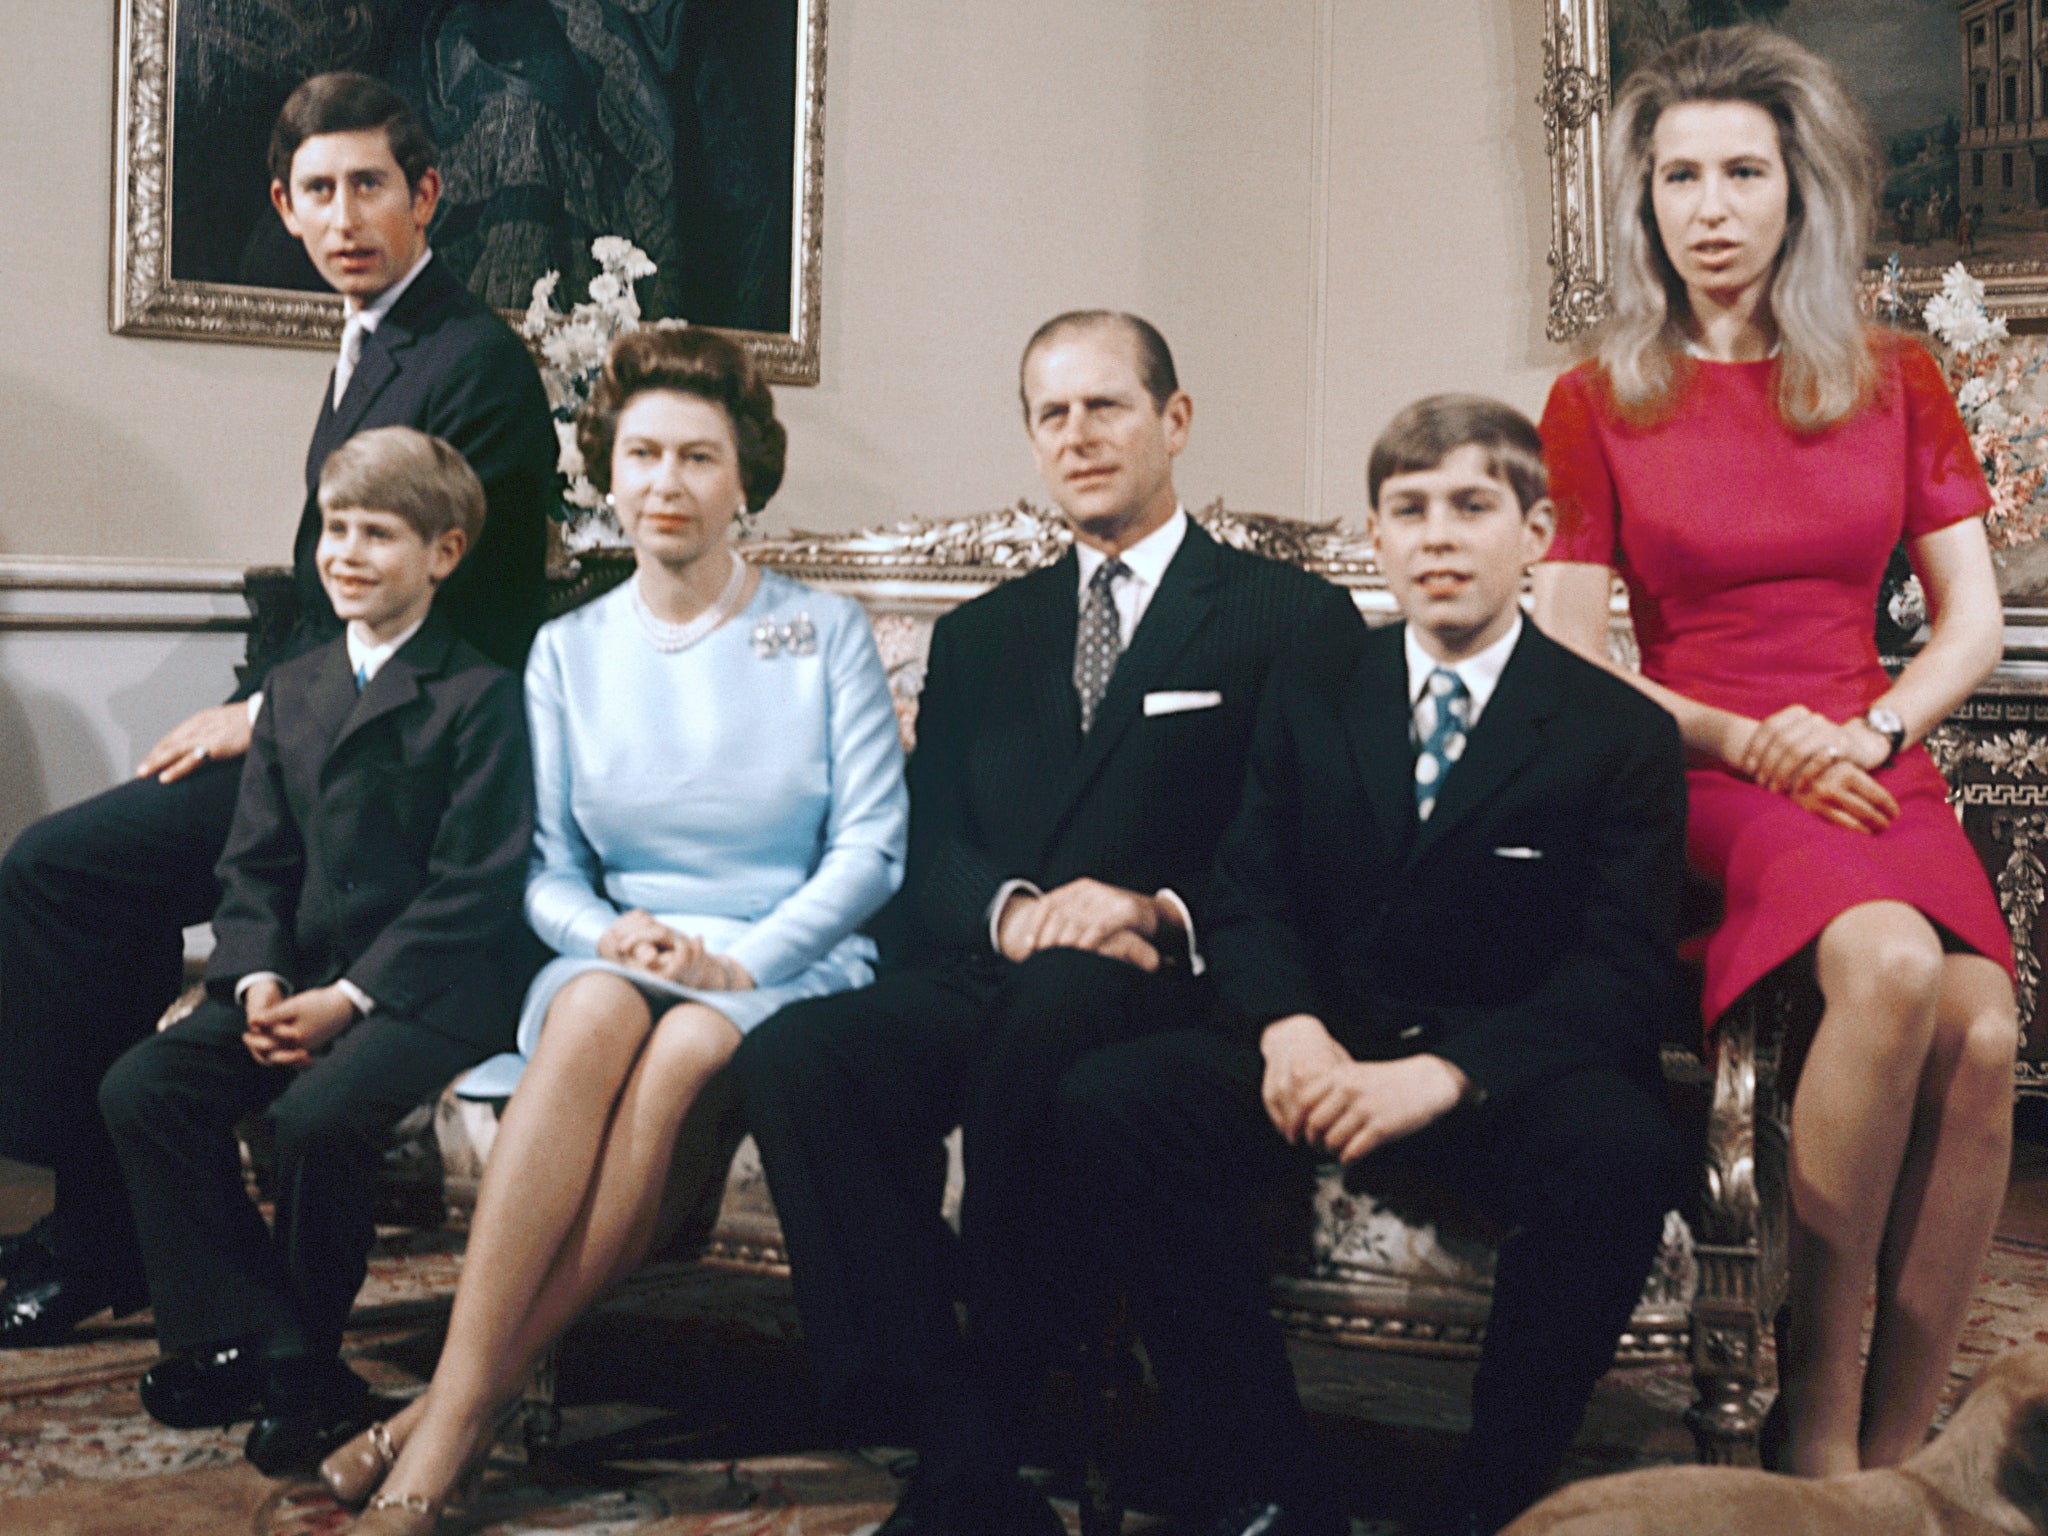 The Queen’s family at Buckingham Palace in 1972